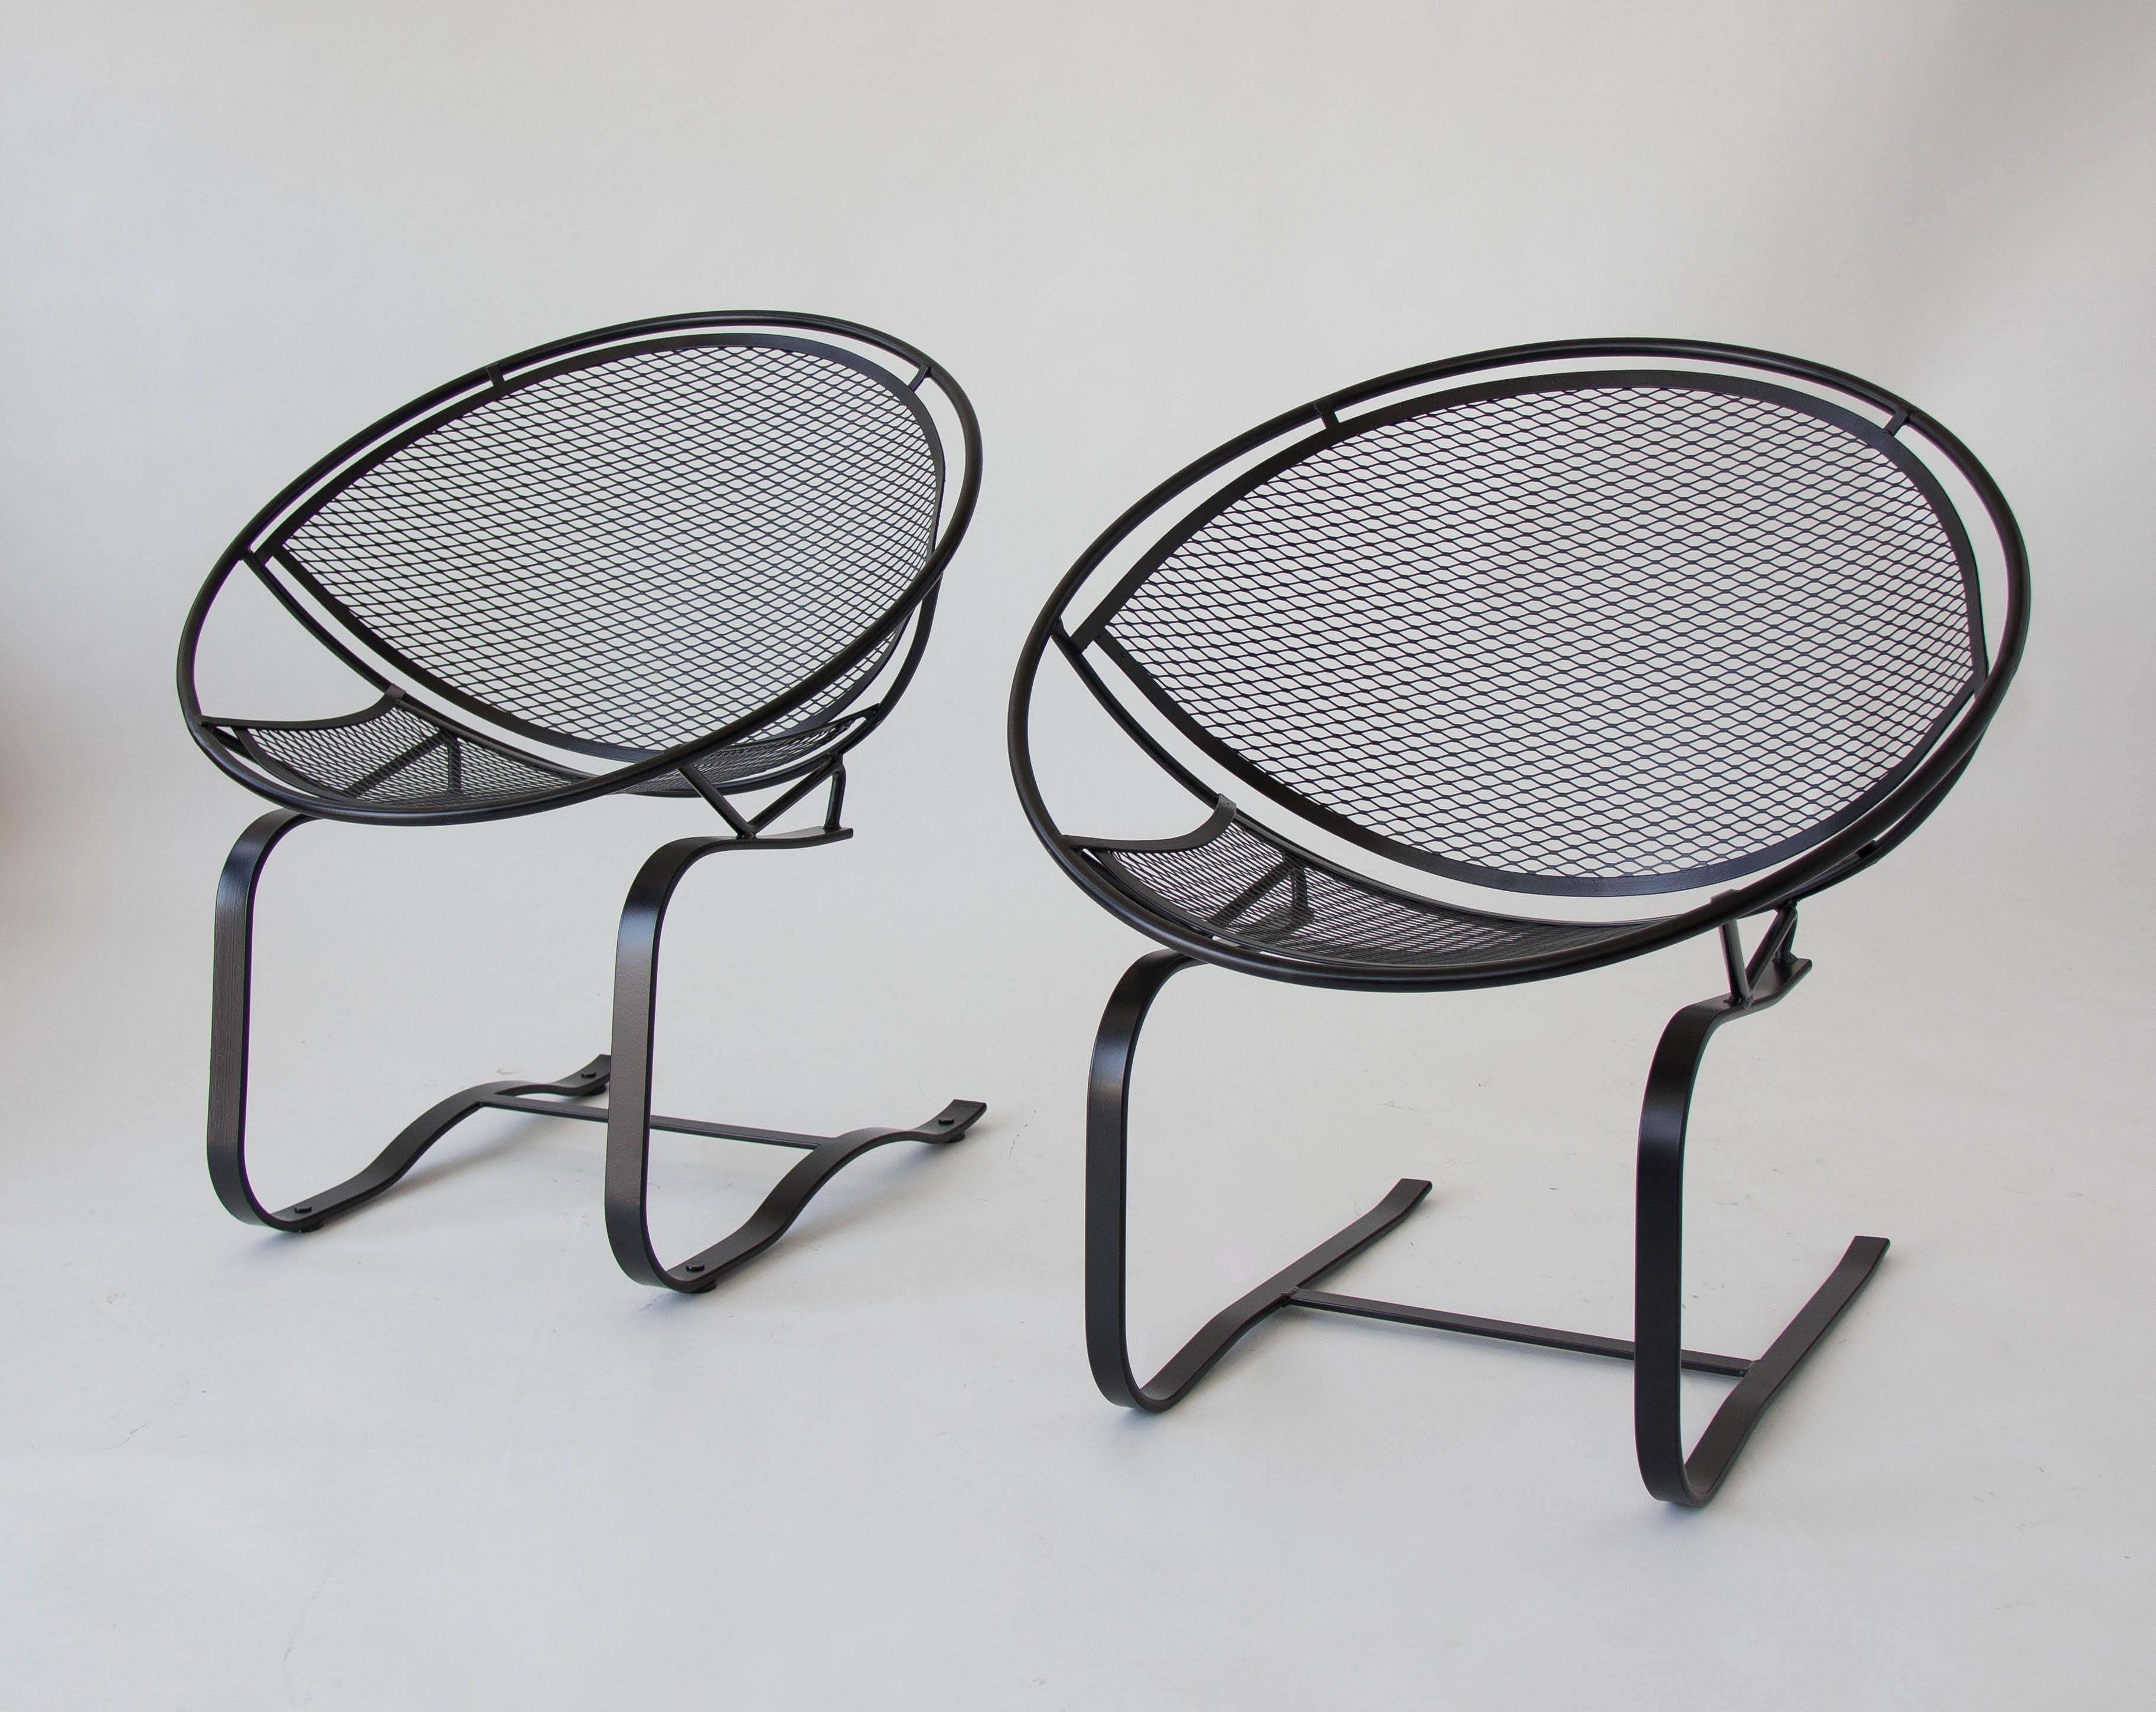 Two wrought iron patio rocking chairs from the “Radar” line, designed by Maurizio Tempestini for John Salterini. Each chair has a bisected hoop construction with a delicate grid of wrought iron forming the body. The cantilevered design sits on two